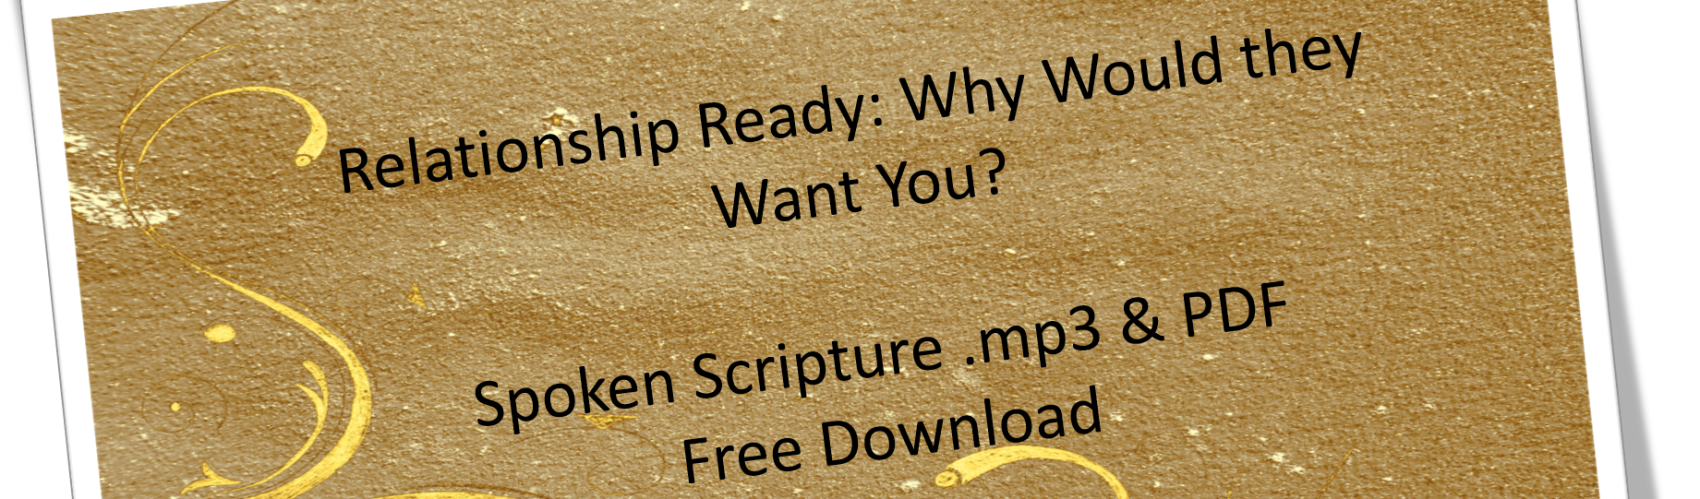 Relationship Ready Free Download